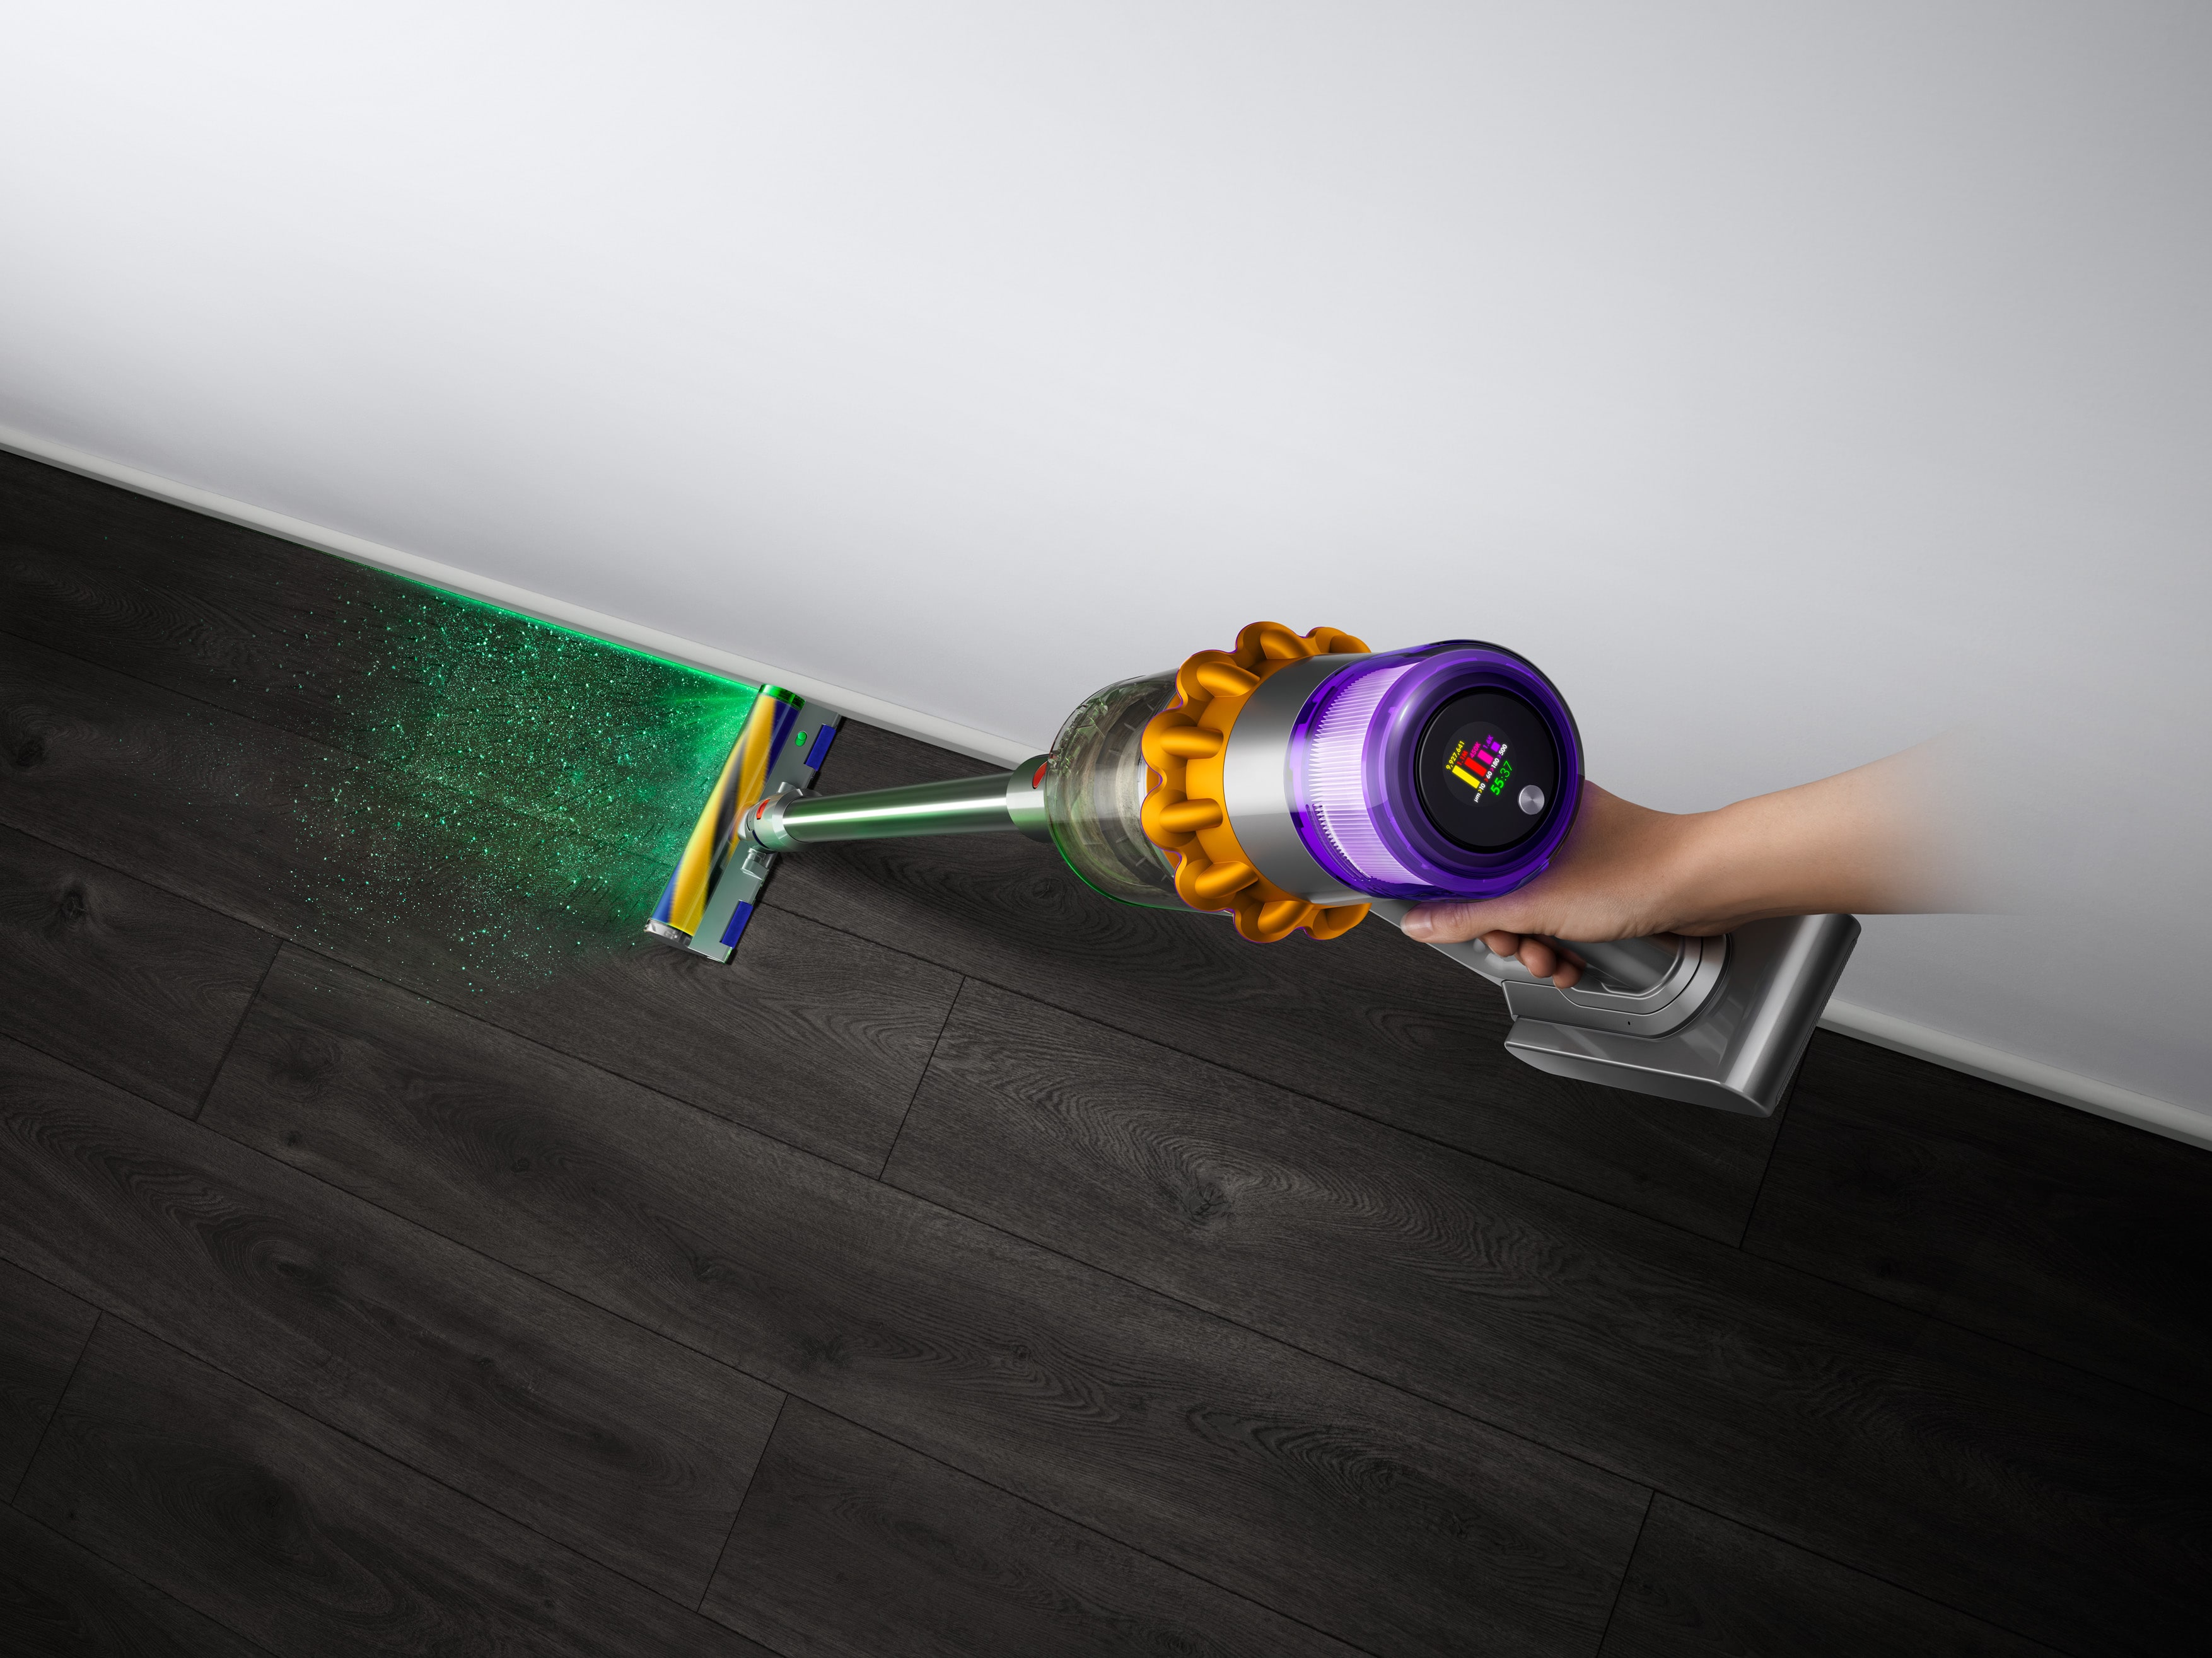 MORE THAN 65% OF HOUSEHOLDS IN THE UAE AND KSA ARE UNLIKELY TO USE A VACUUM WHEN CLEANING, REVEALS DYSON GLOBAL DUST STUDY